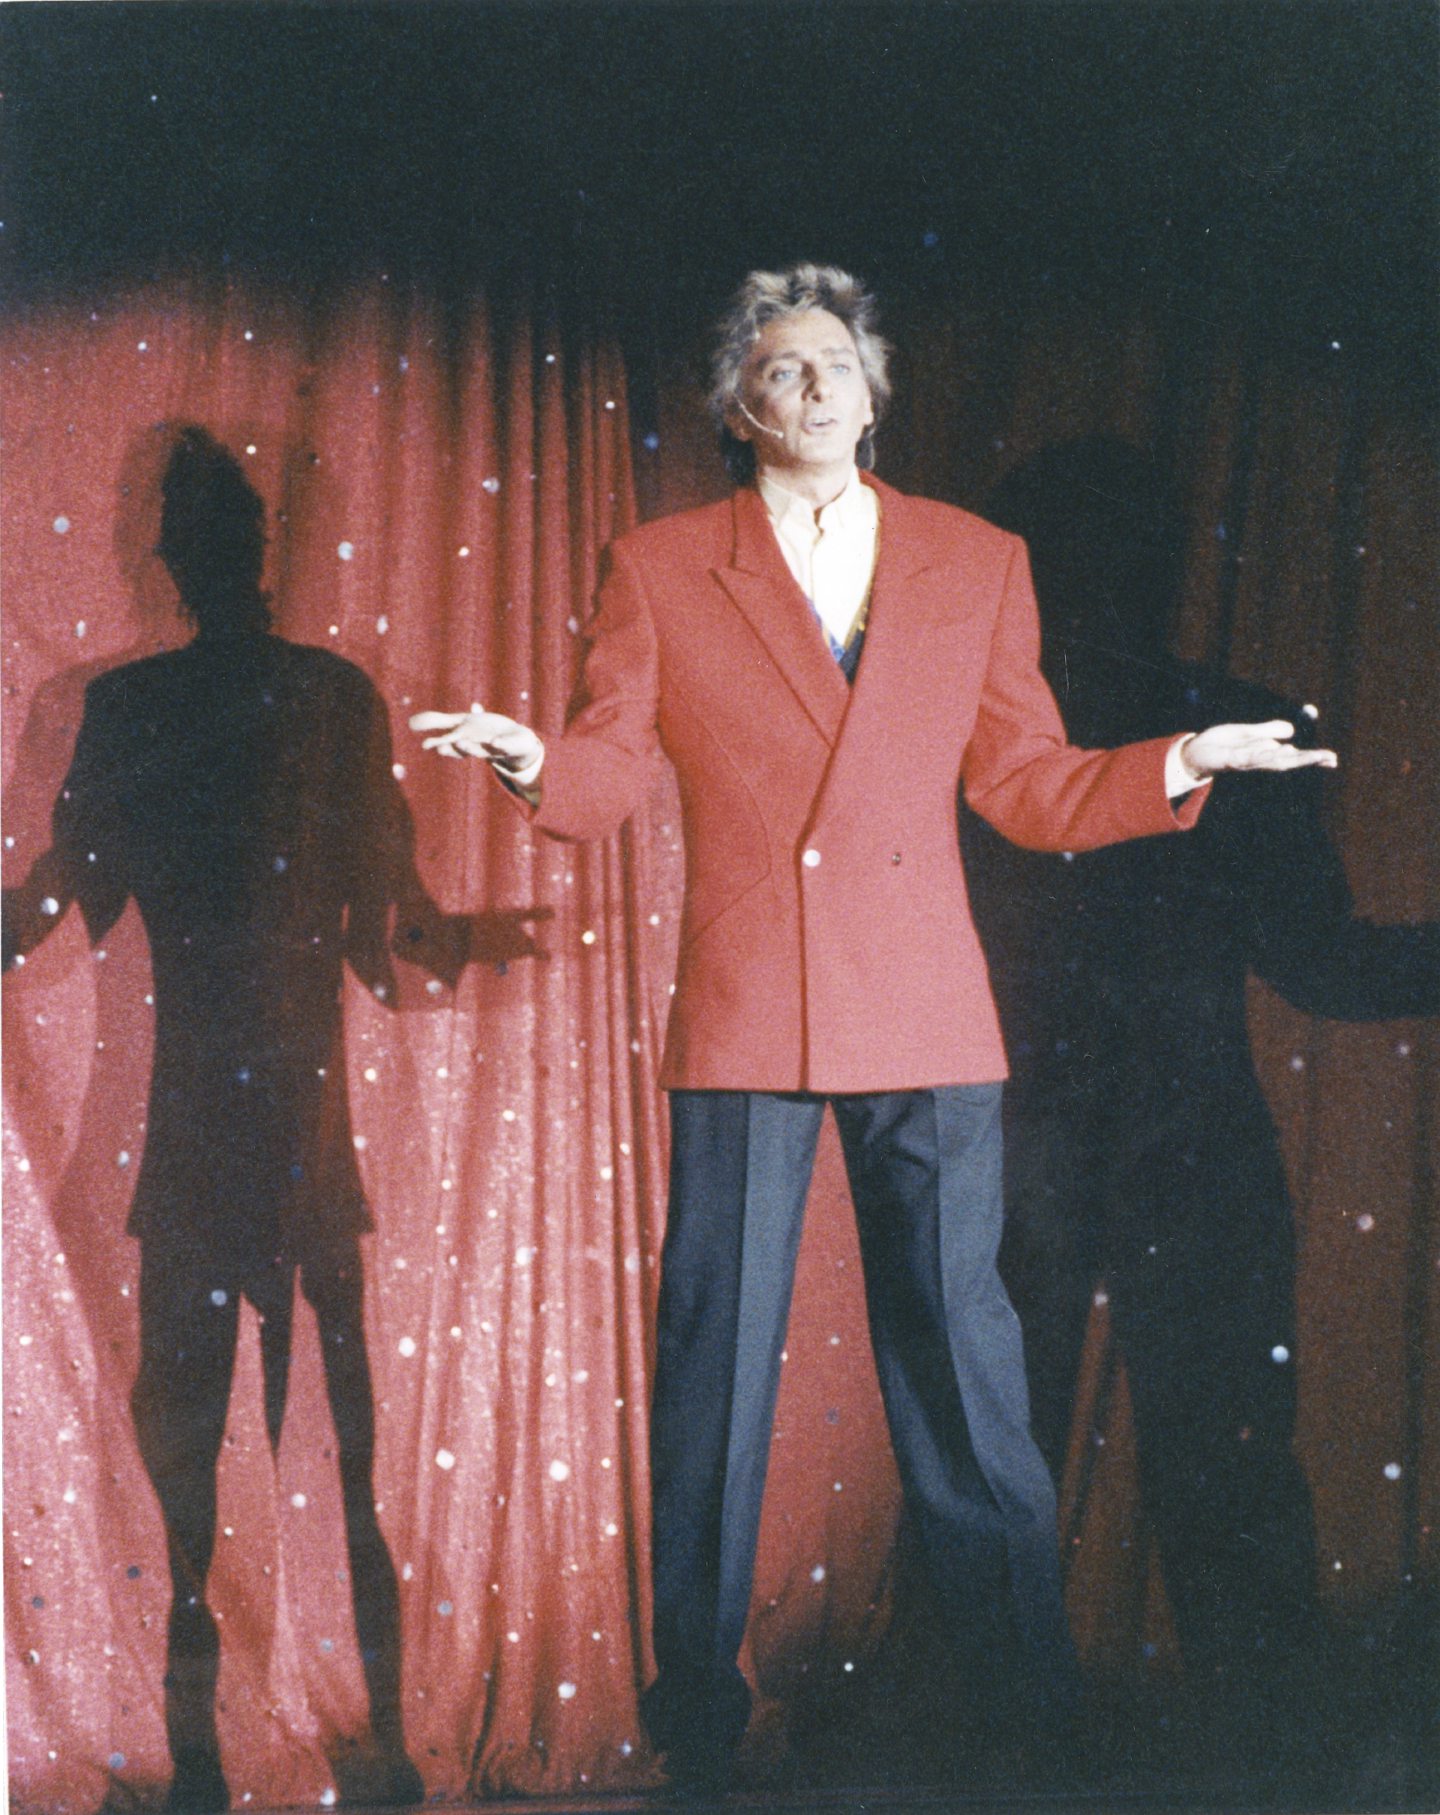 Barry Manilow on stage in Aberdeen in 1991.